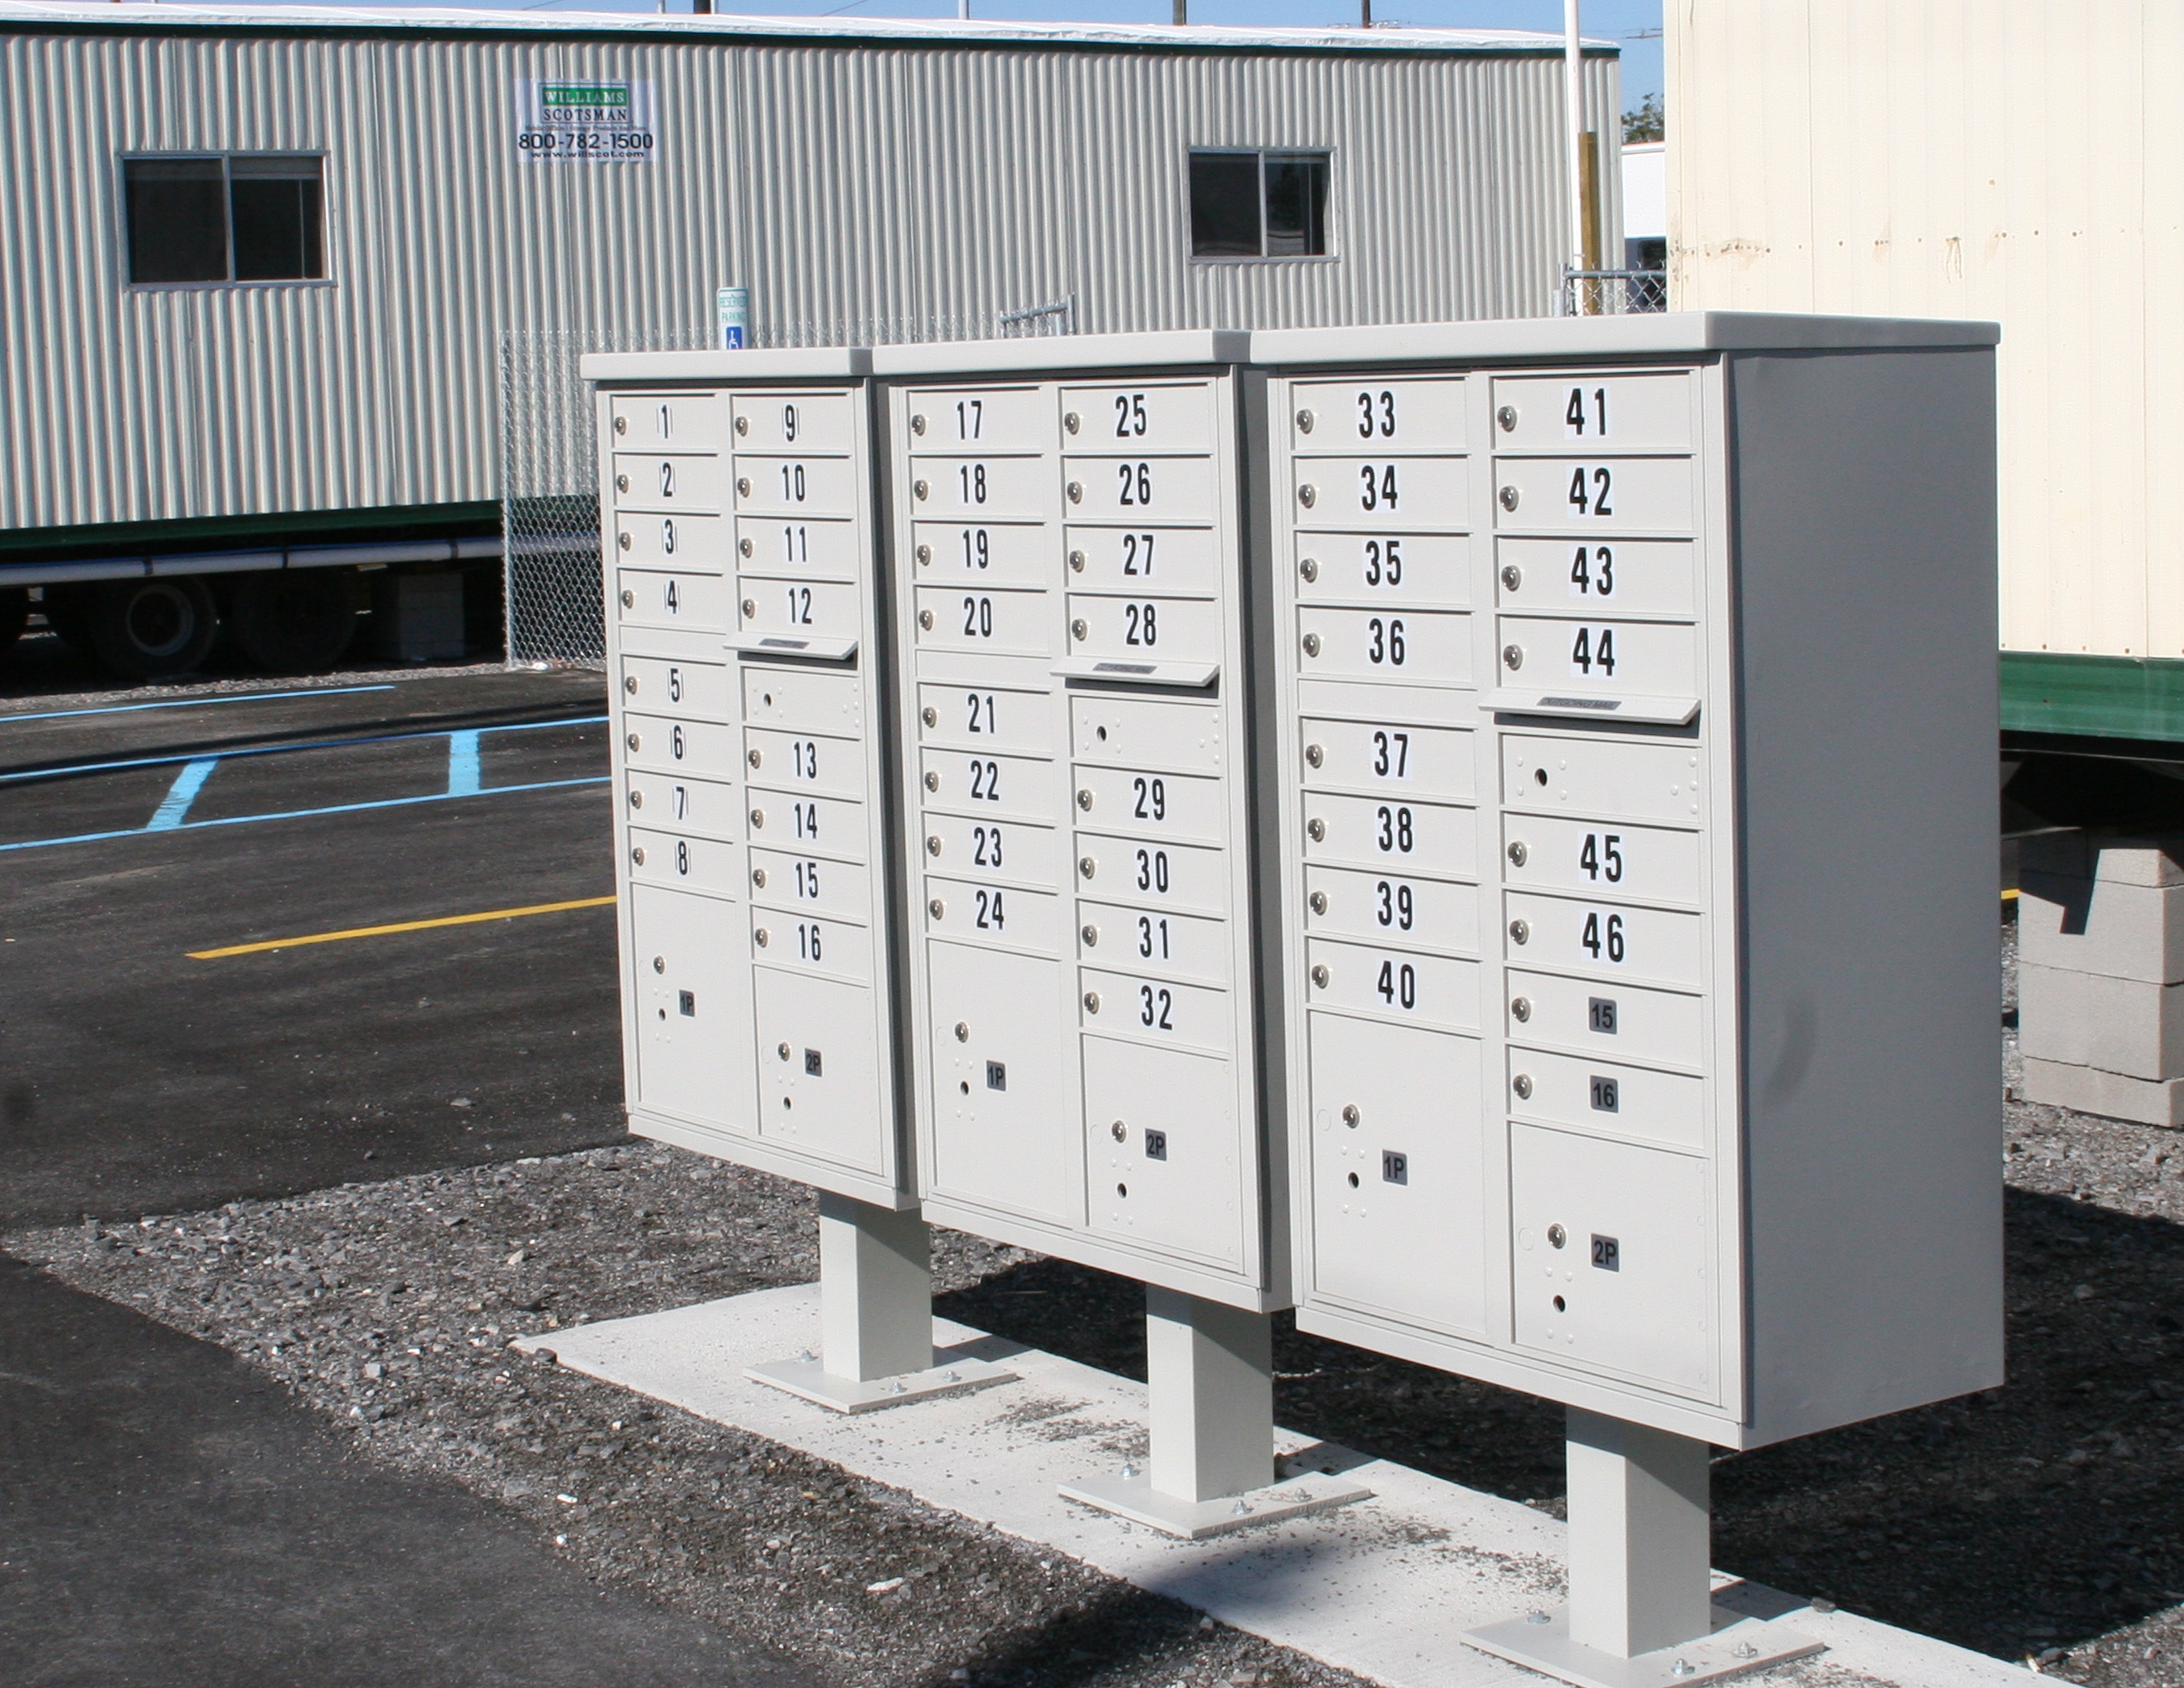 A U.S. Postal Service CBU Mail Station in New Orleans, Louisiana. New Orleans, LA, December 20, 2005 - These mailboxes were set up for families living in temporary housing provided by the Federal Emergency Management Agency (FEMA) at a former baseball field following Hurricane Katrina. Photo taken by Robert Kaufmann on December 21, 2005.